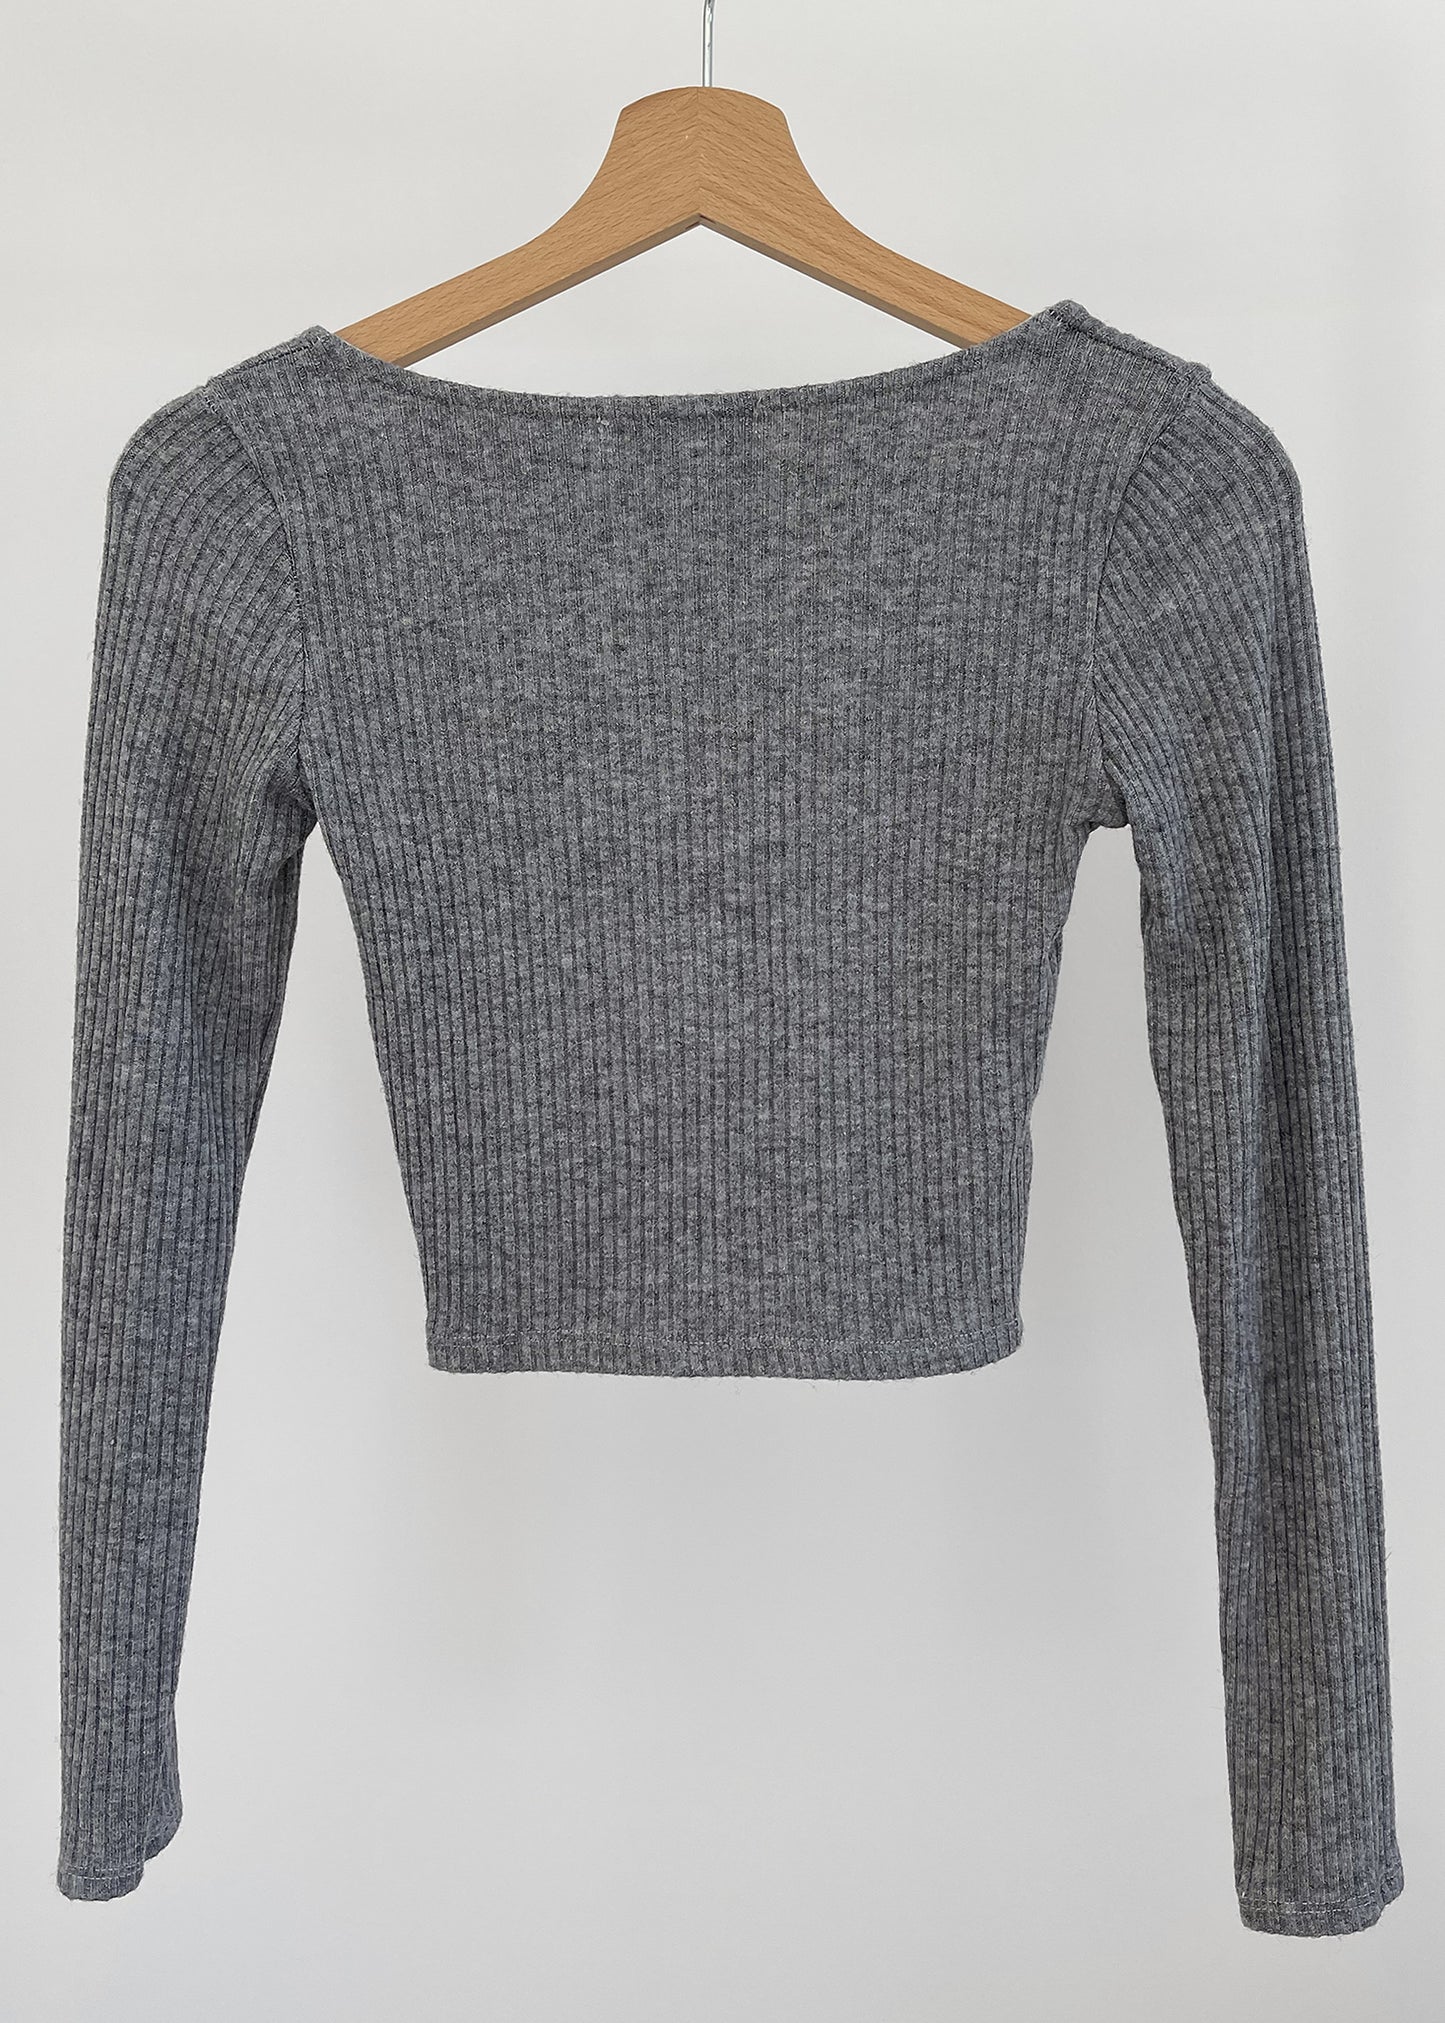 Ribbed top with square neck in grey